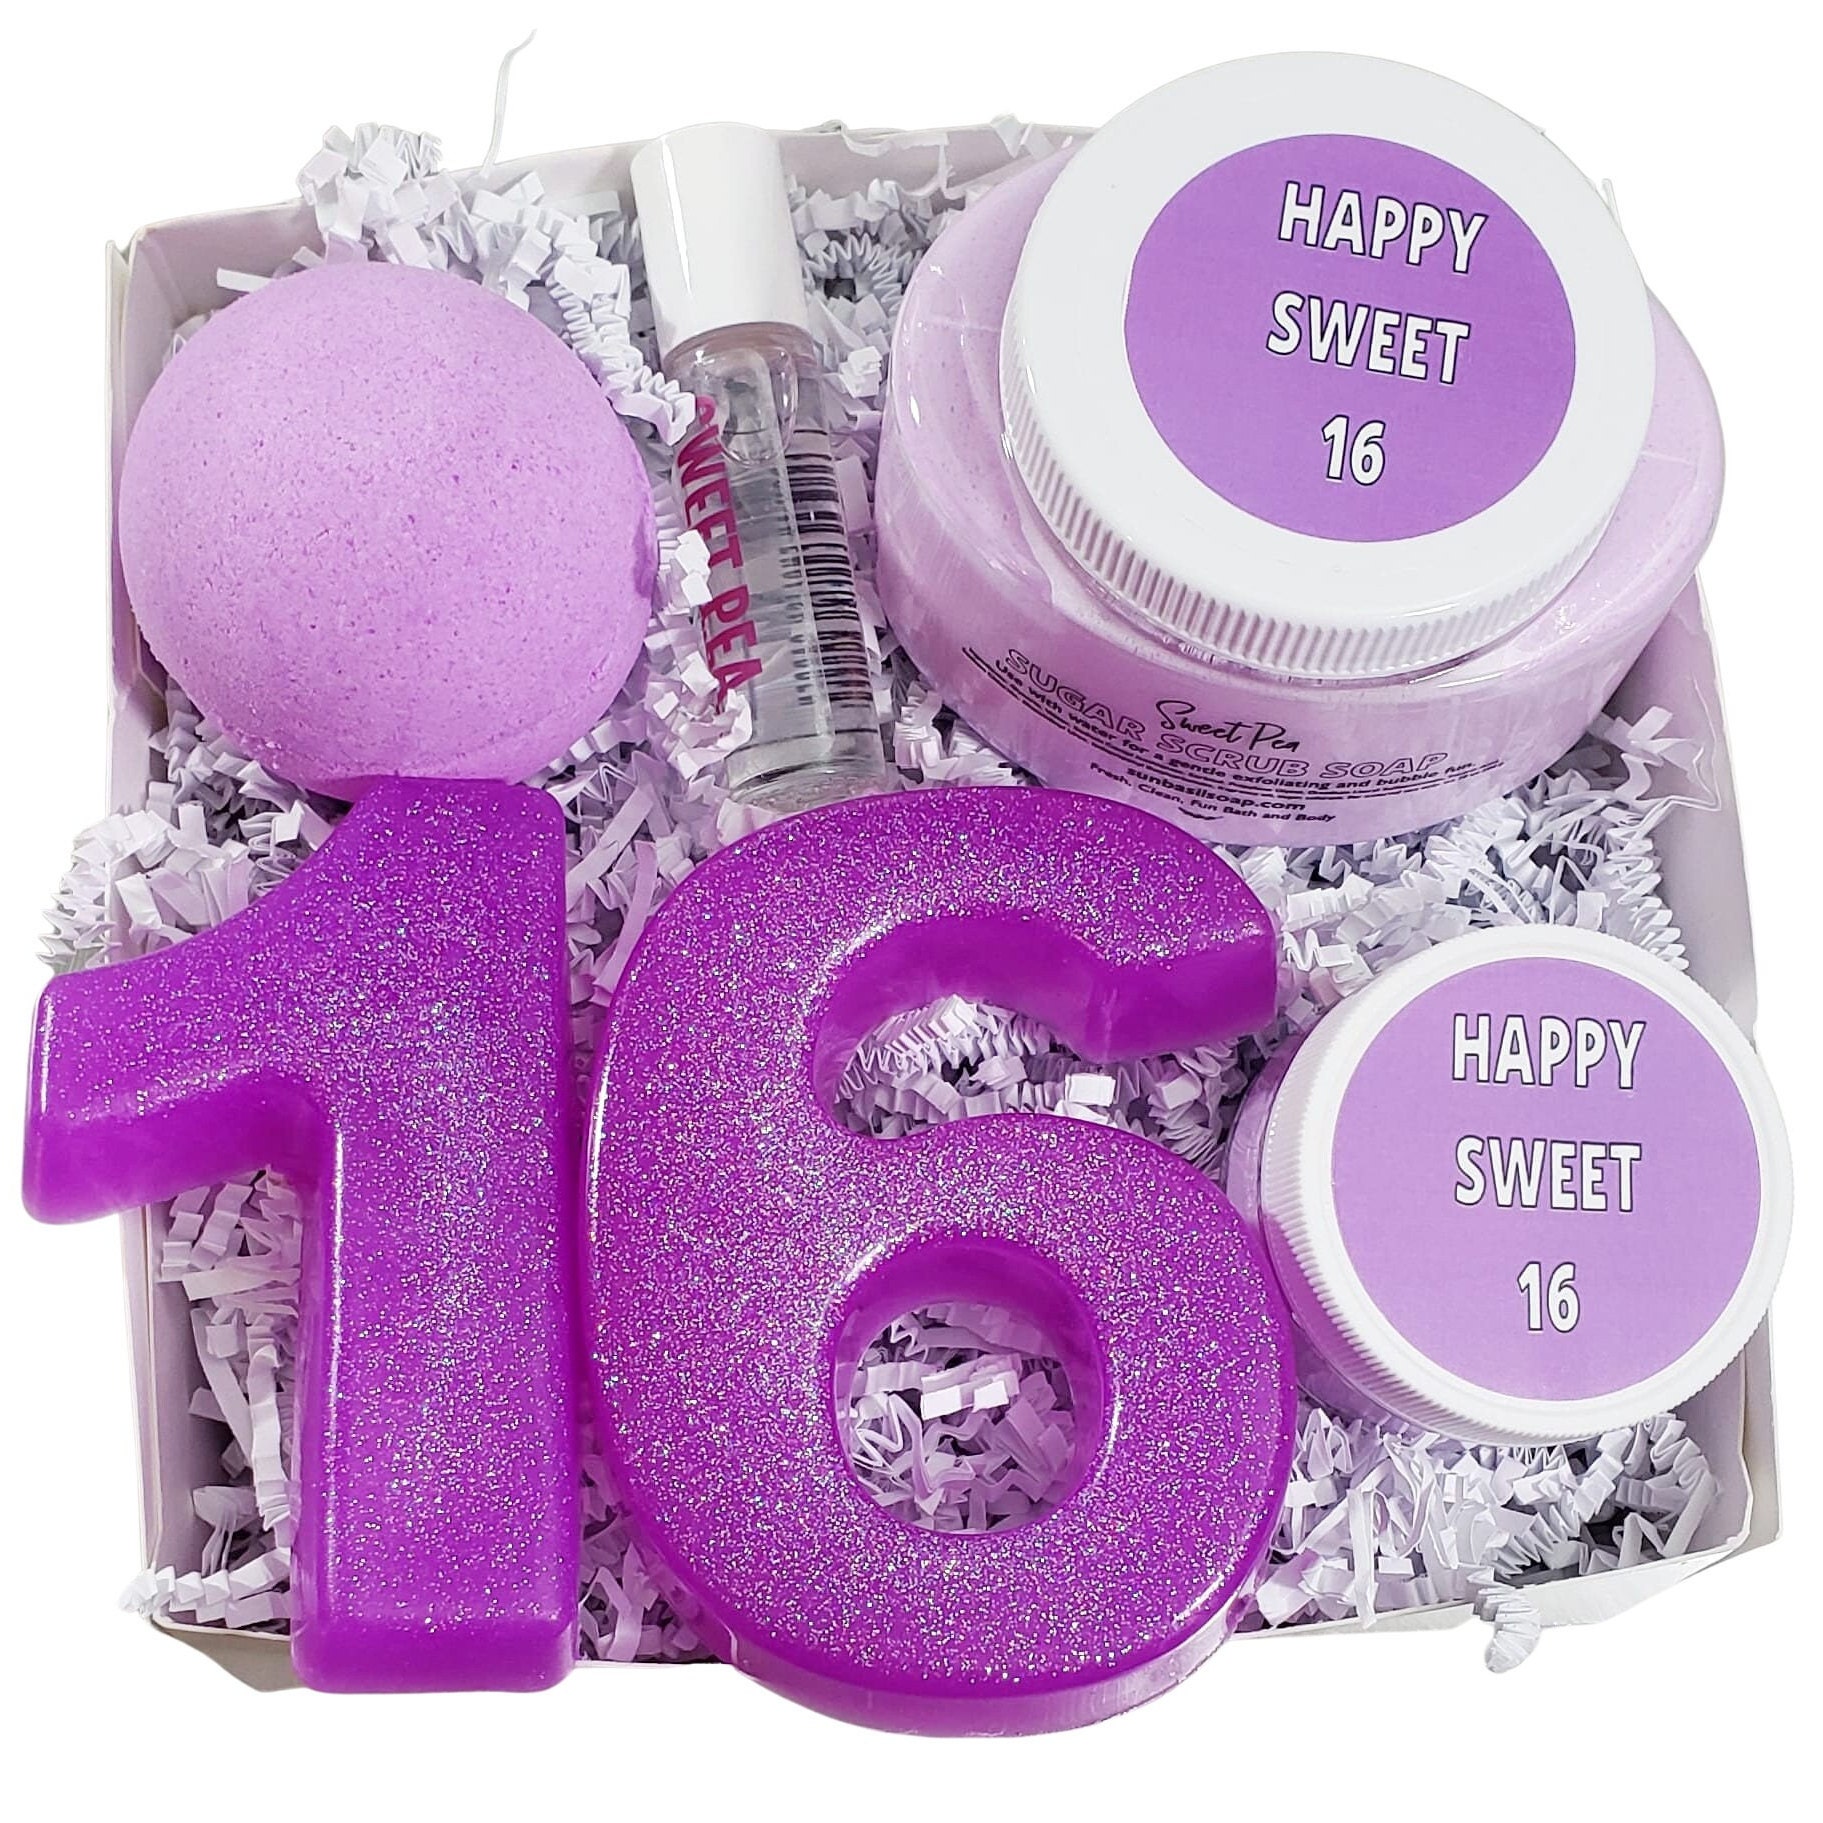 thinkstar Sweet 16 Gifts for Girls - 16 Birthday Decorations Gifts,16th Birthday Gifts for Girls,Gifts for 16 Year Old Girl Ideas,Sw